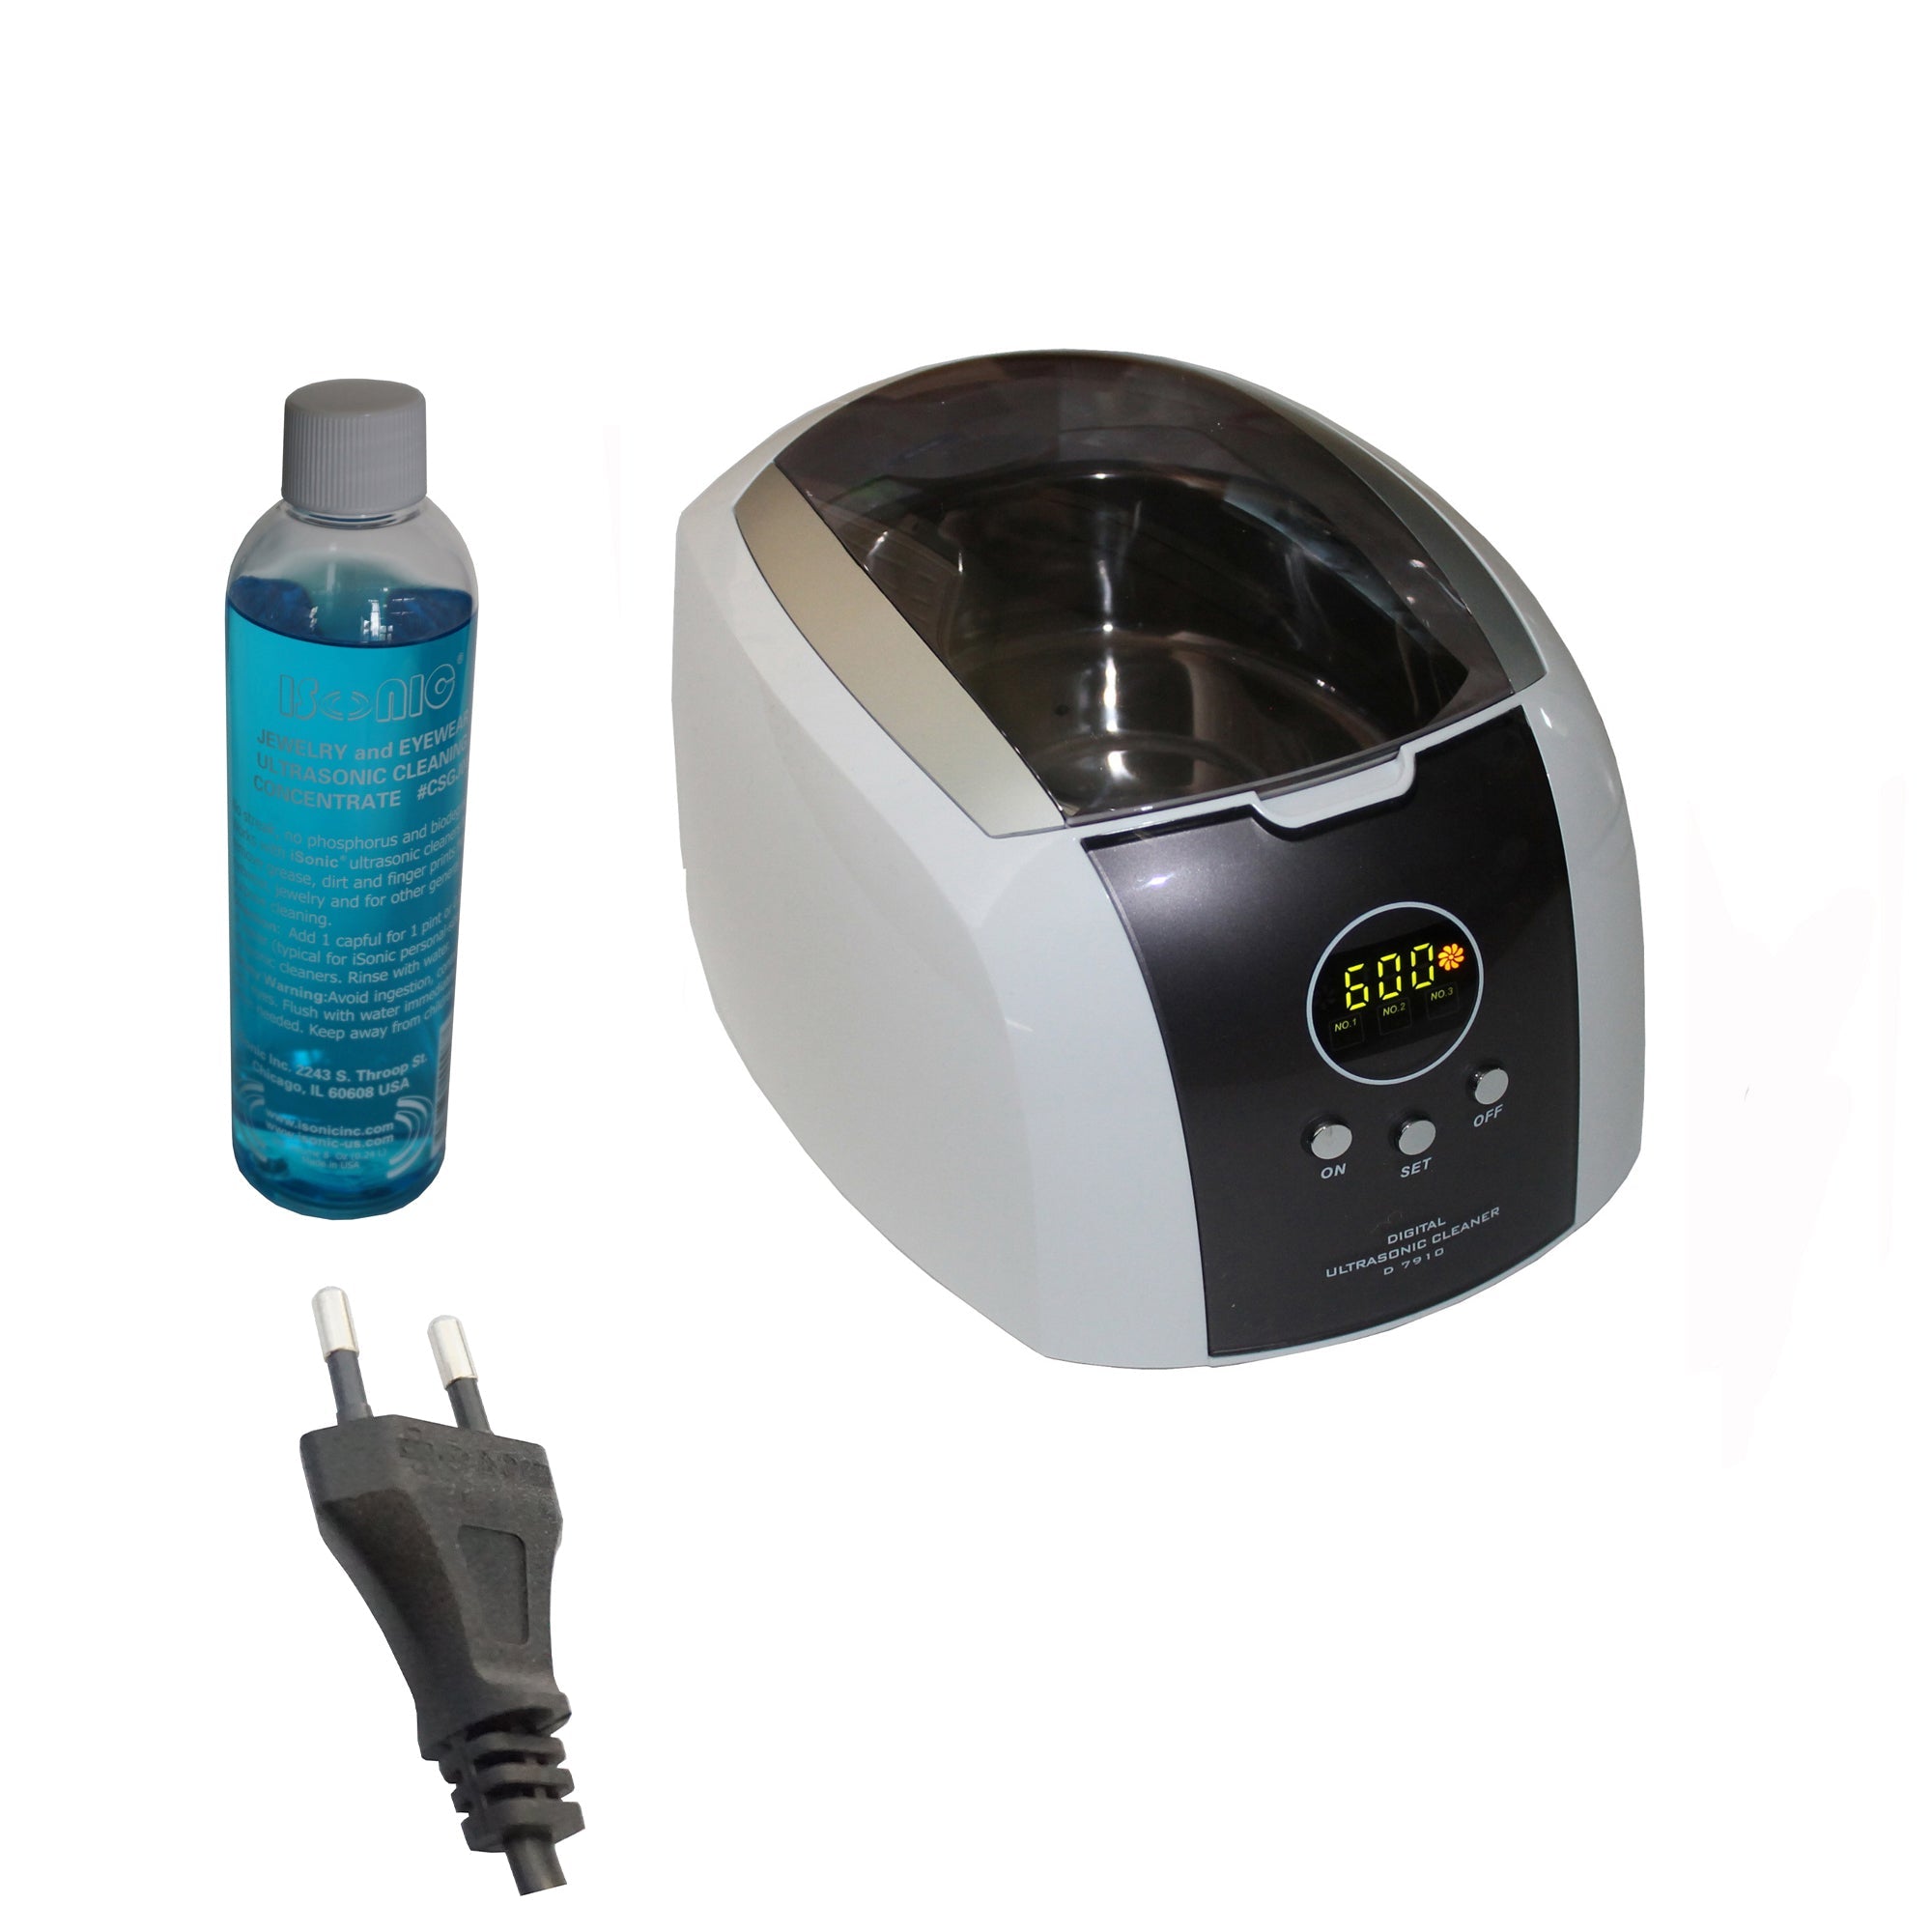 D7910B+CSGJ01 | iSonic? Digital Ultrasonic Cleaner, with Jewelry/Eyewear Cleaning Solution Concentrate CSGJ01, 8OZ, Free Shipping!